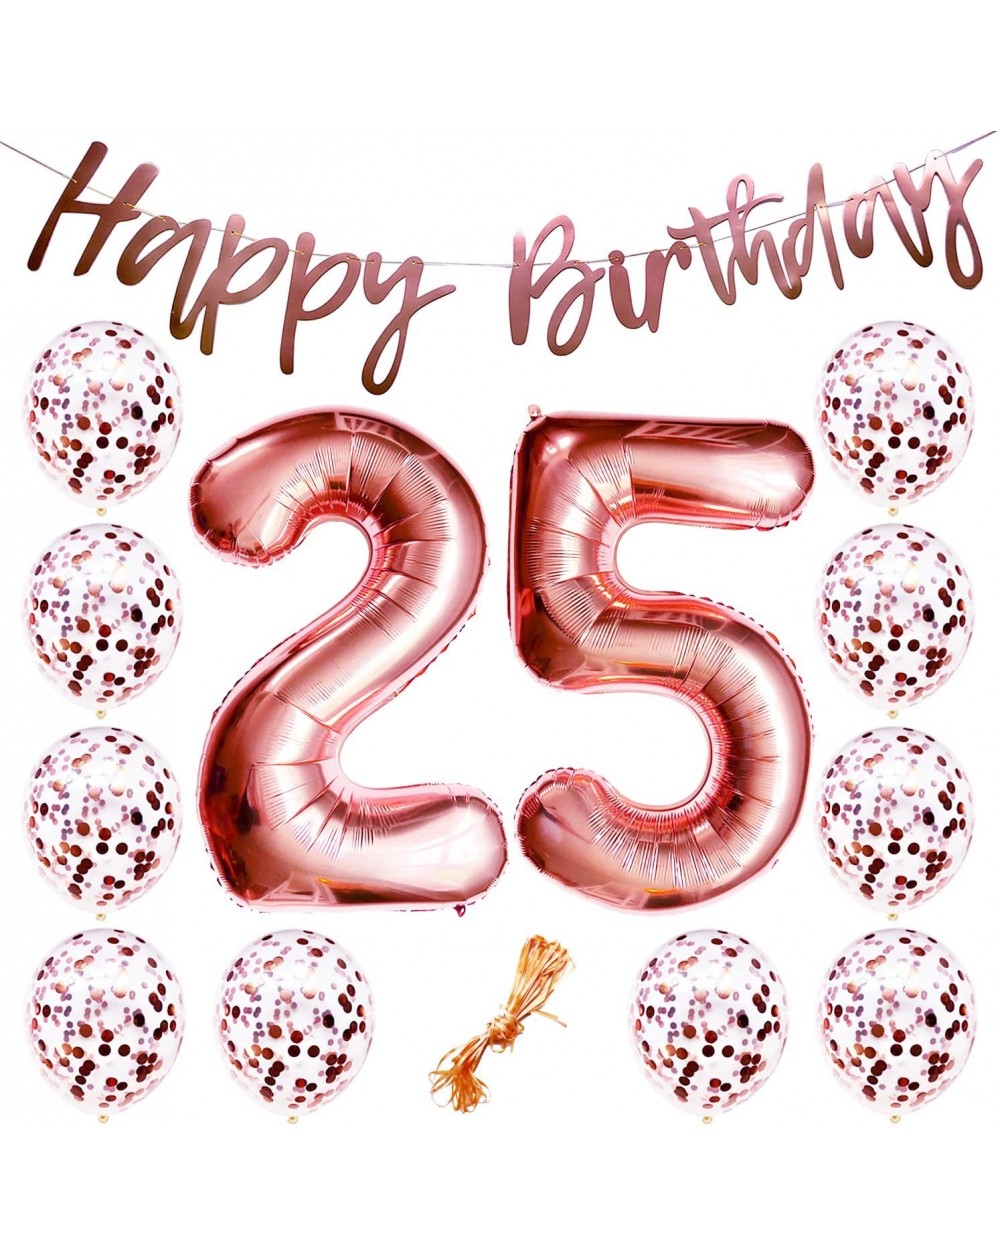 Balloons 25th Birthday Party Decorations Rose Gold Decor Strung Banner (Happy Birthday) & 12PC Helium Balloons w/Ribbon [Huge...